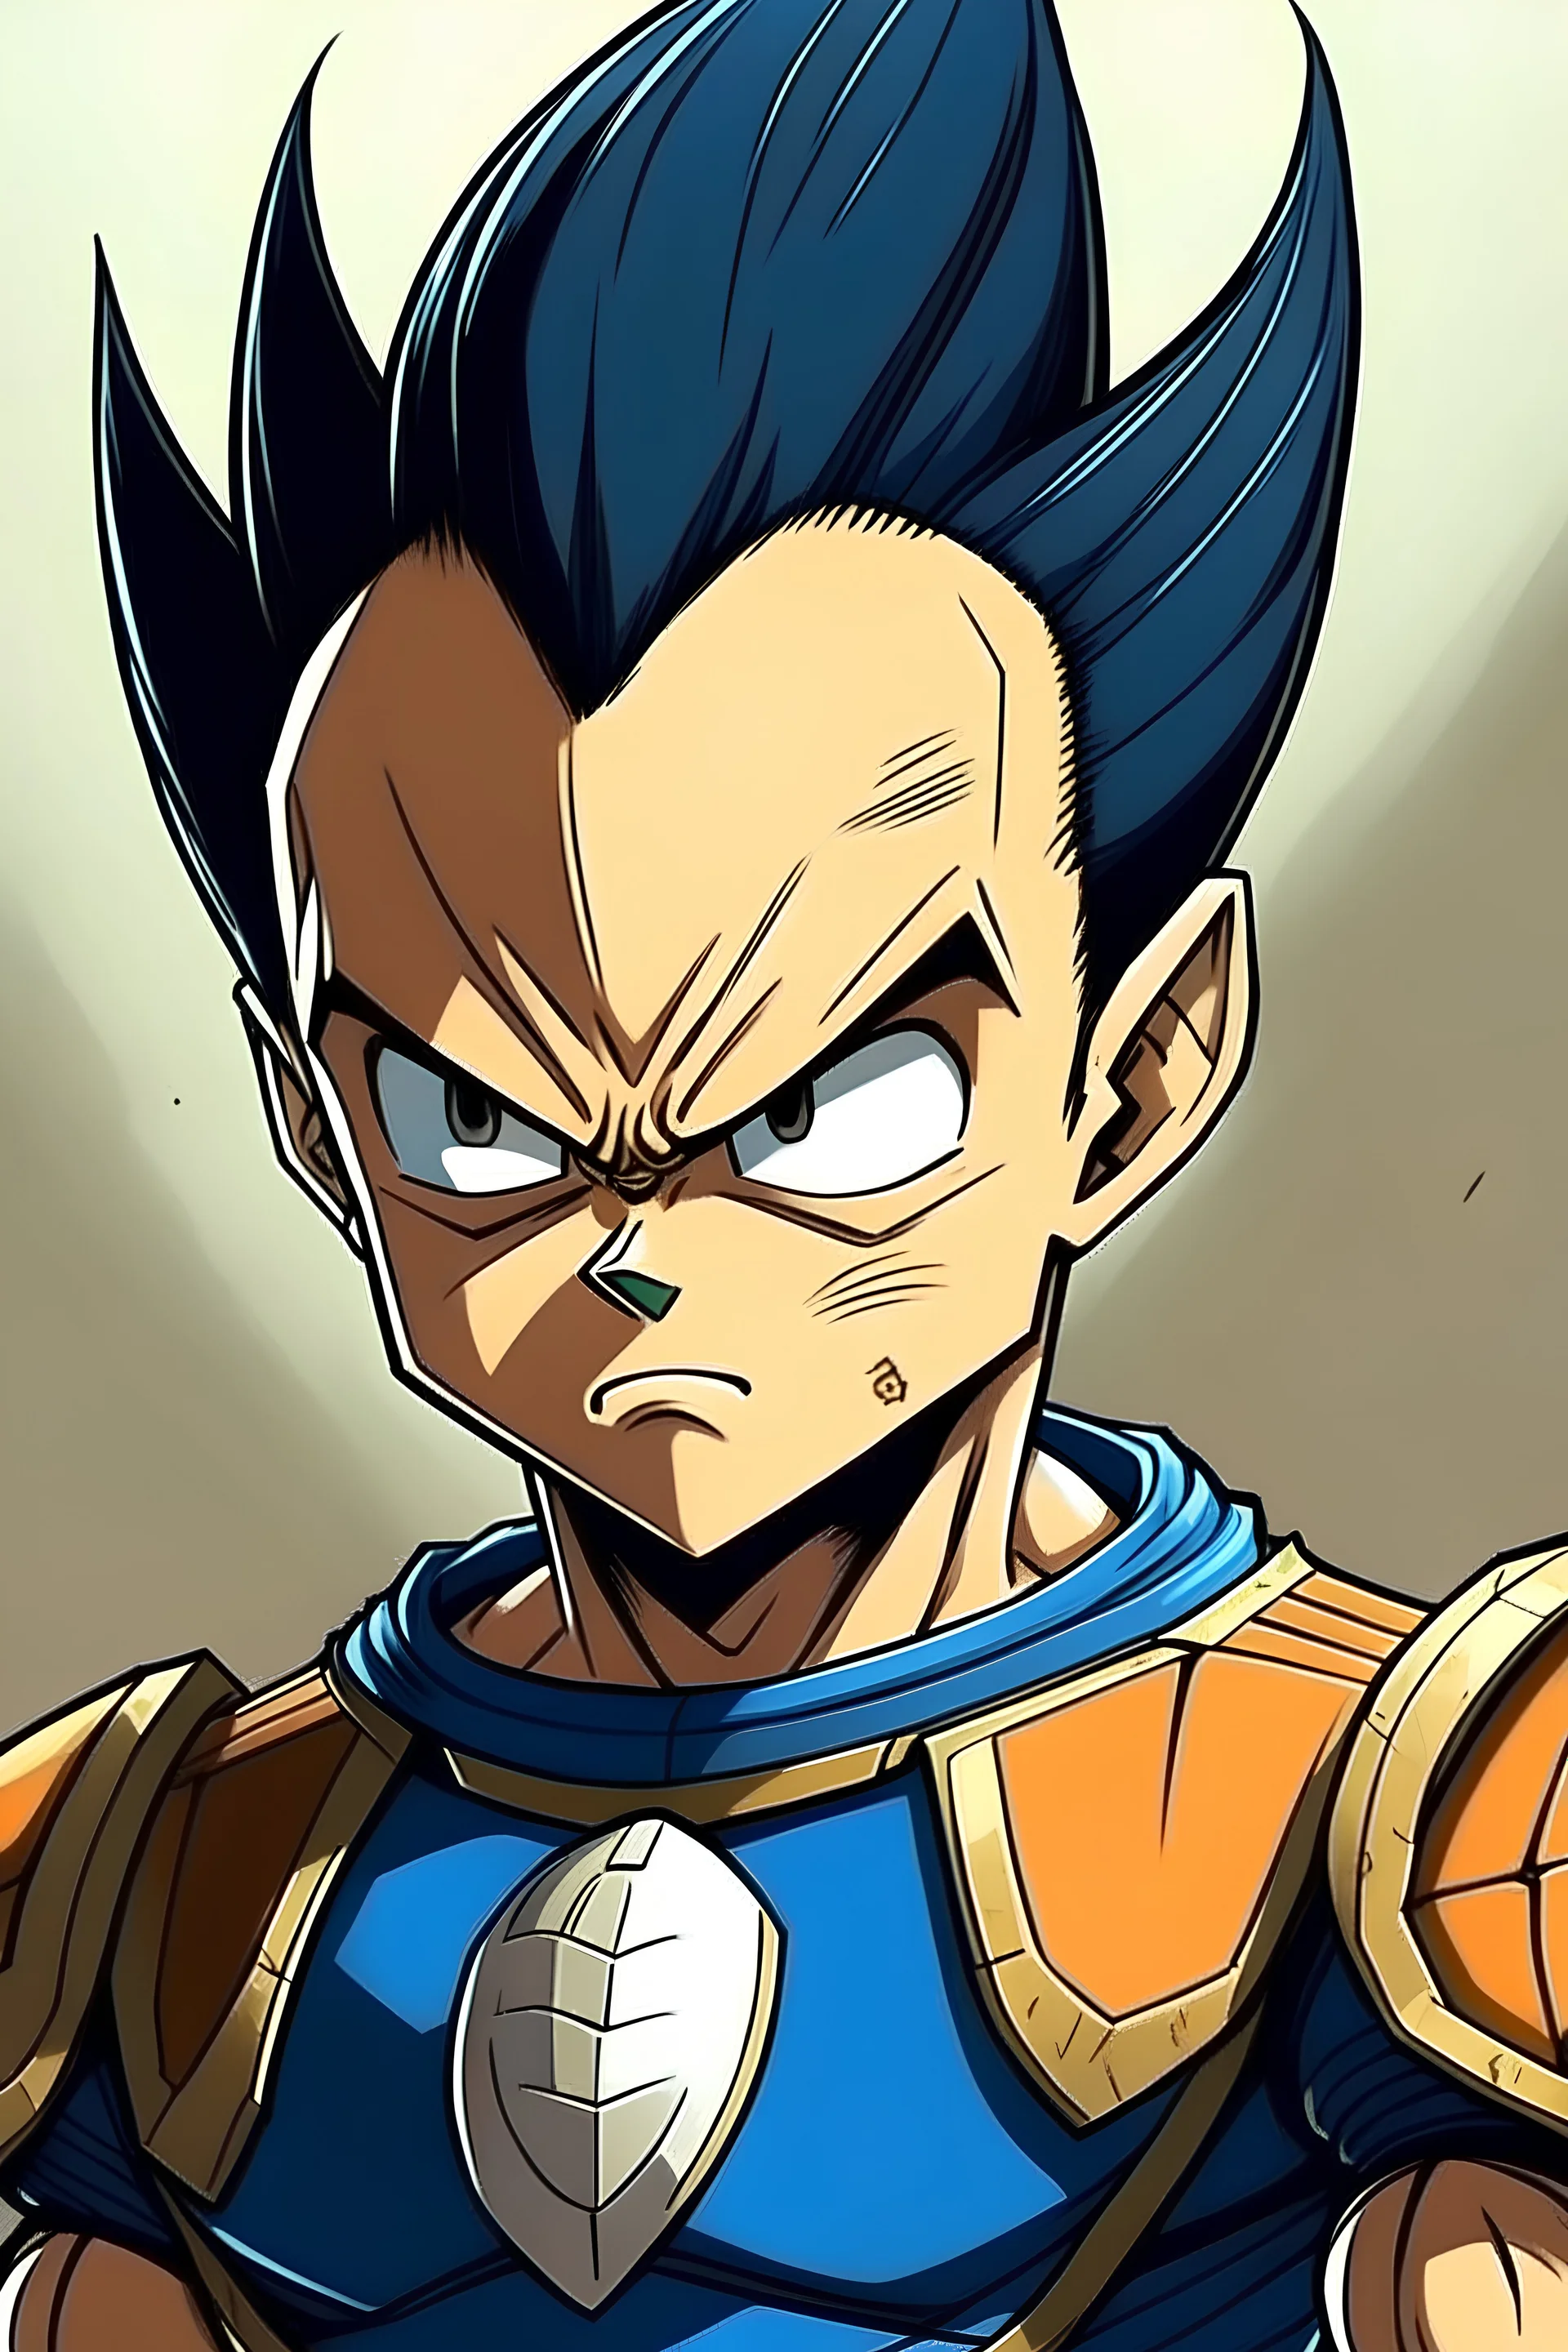 Vegeta from Dragon Ball when he was a kid